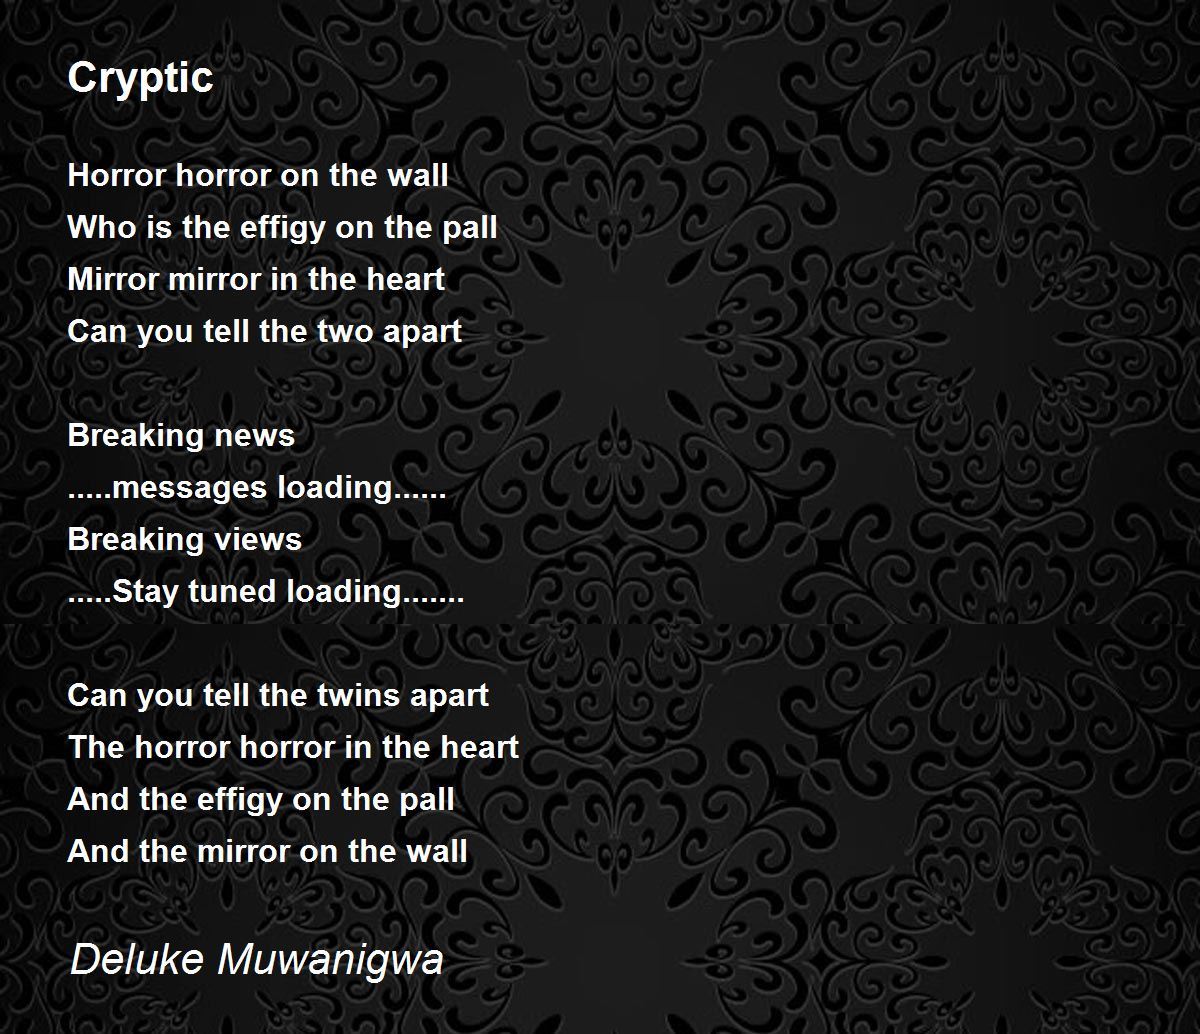 poetry - O Cryptic! My Cryptic! - Puzzling Stack Exchange